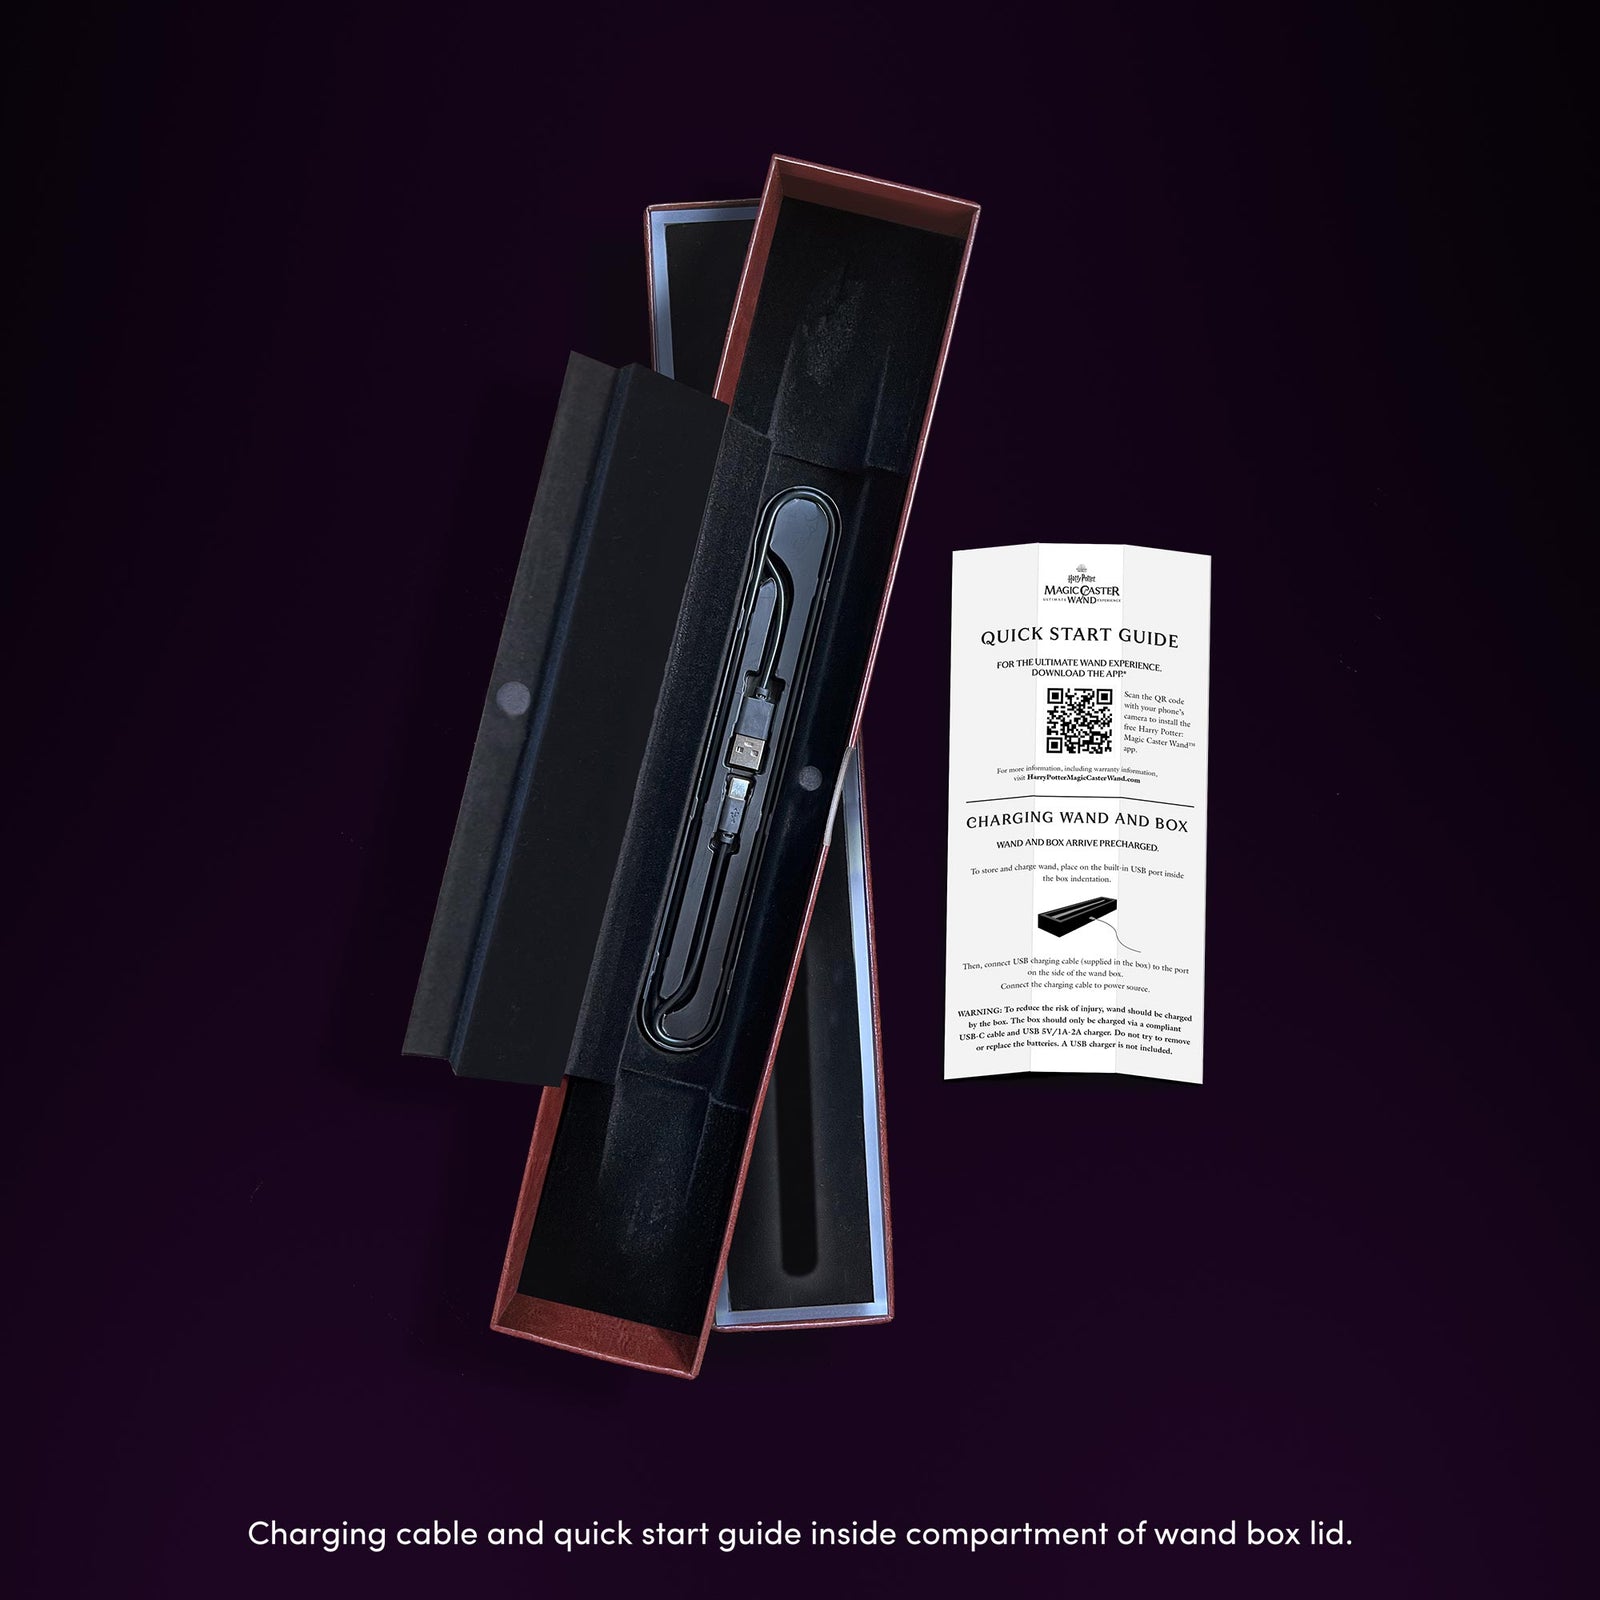 Pre-order for members tomorrow! Sign up now ✨  Wands at the ready! Harry  Potter Fan Club members can pre-order their brand-new Harry Potter: Magic  Caster Wand from tomorrow at 4pm BST (